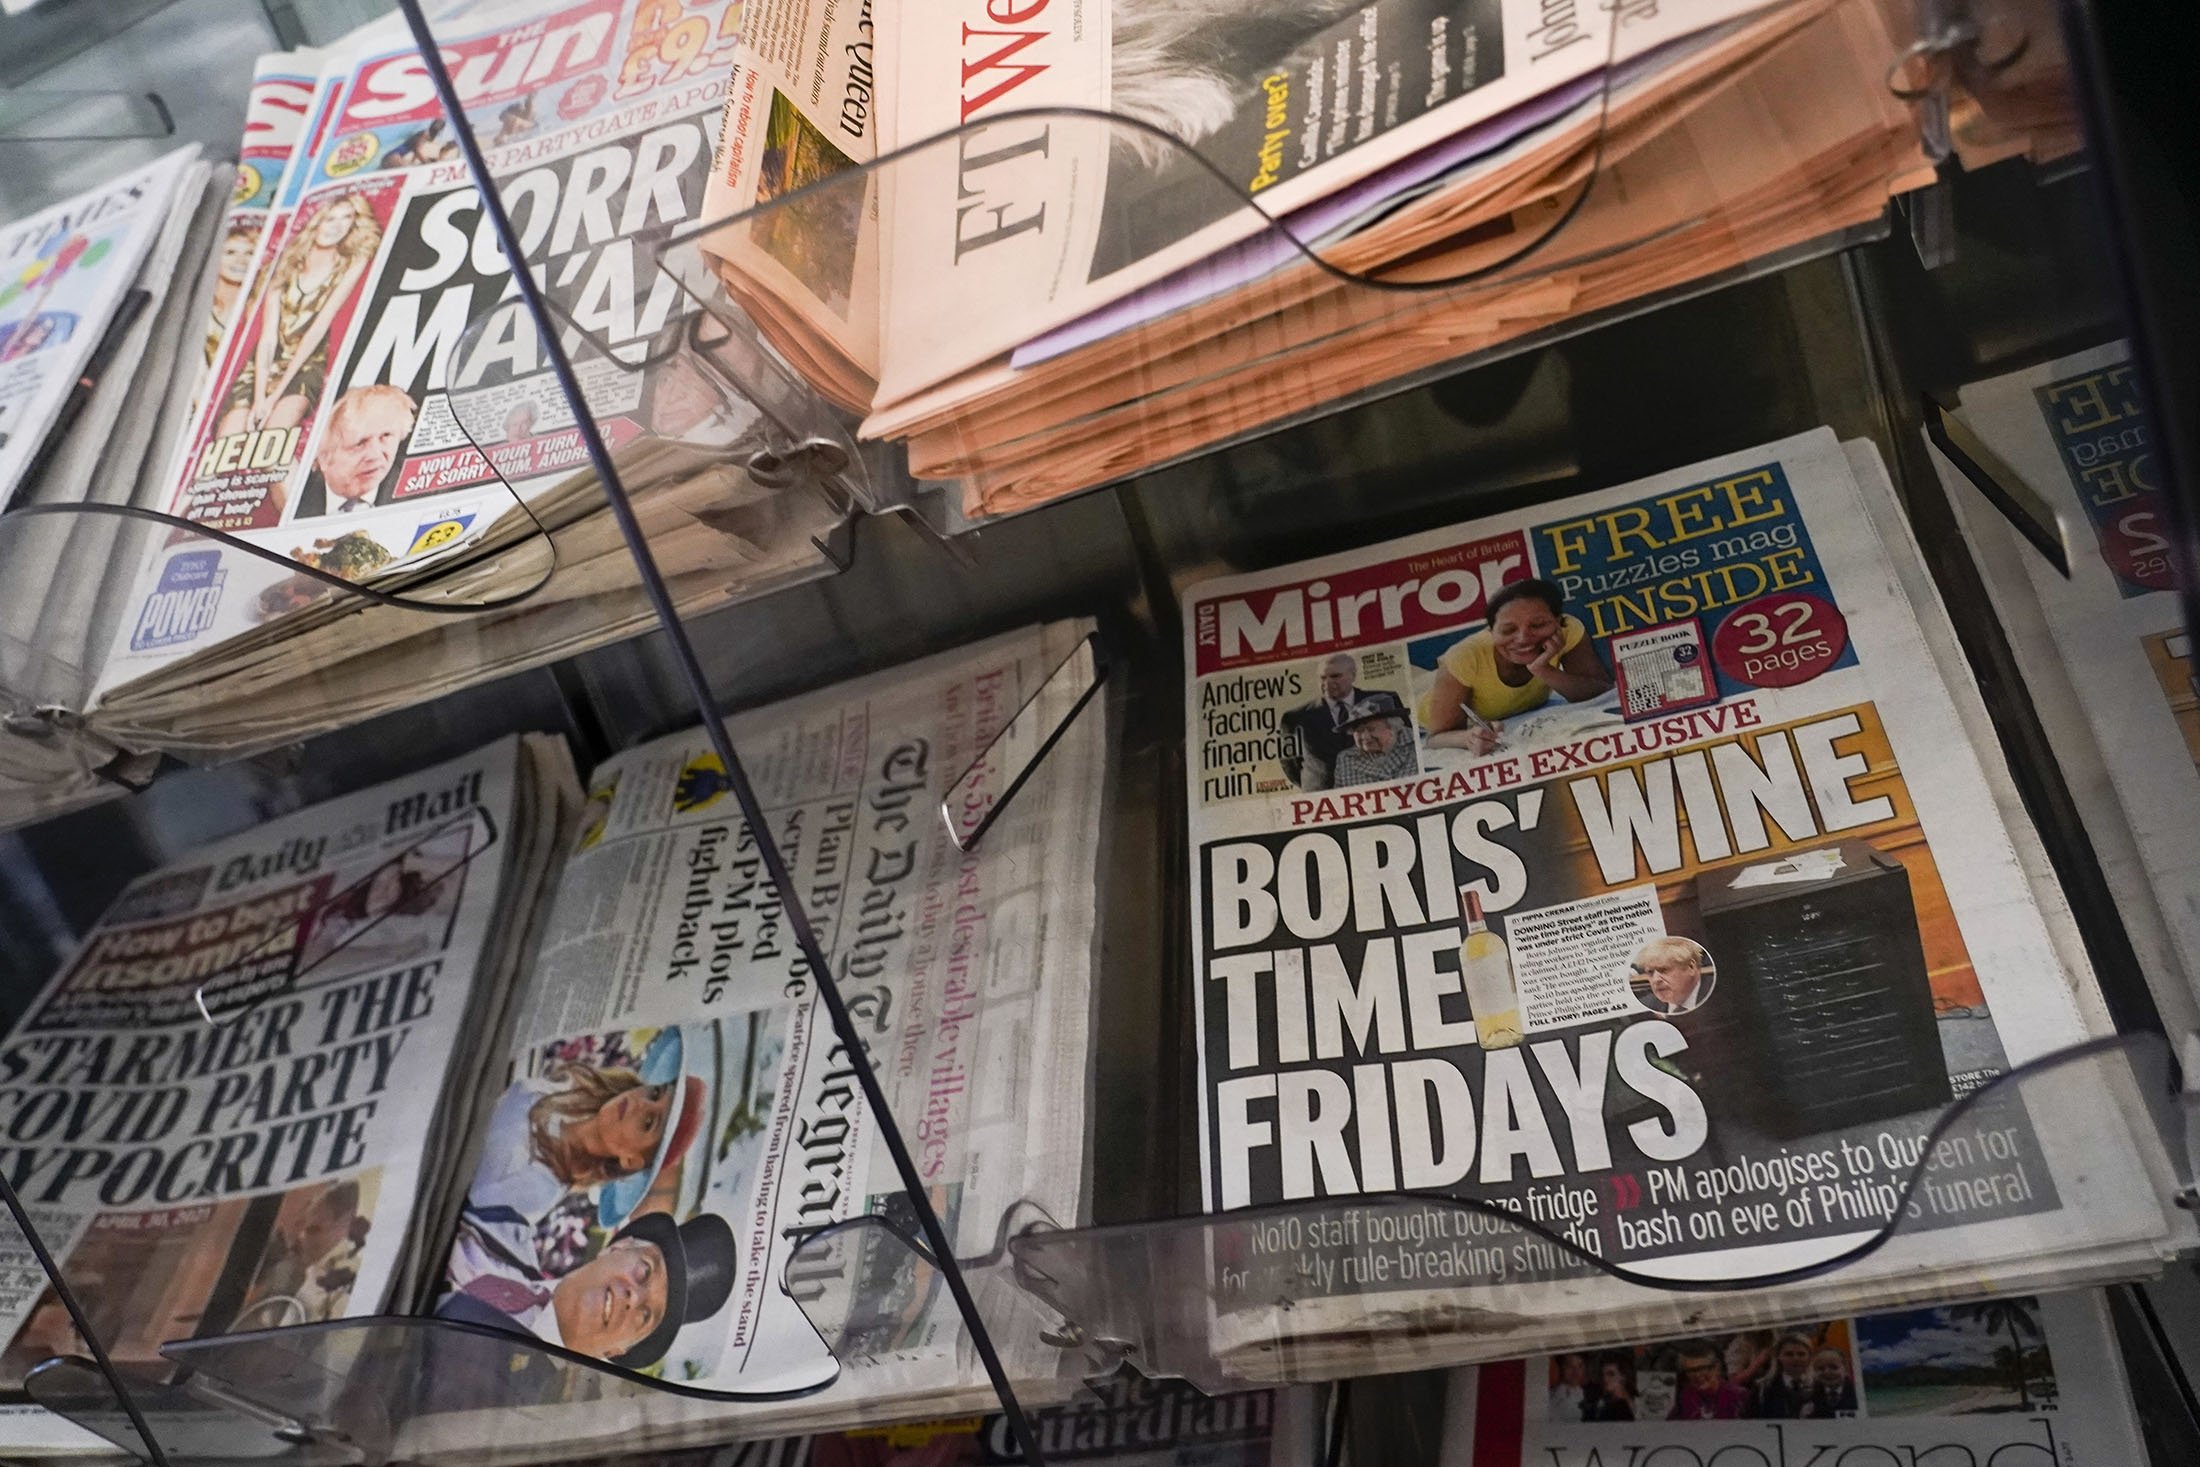 Front pages of British newspapers are displayed outside a newsagent, in London, U.K., Jan. 15, 2022. (AP Photo)